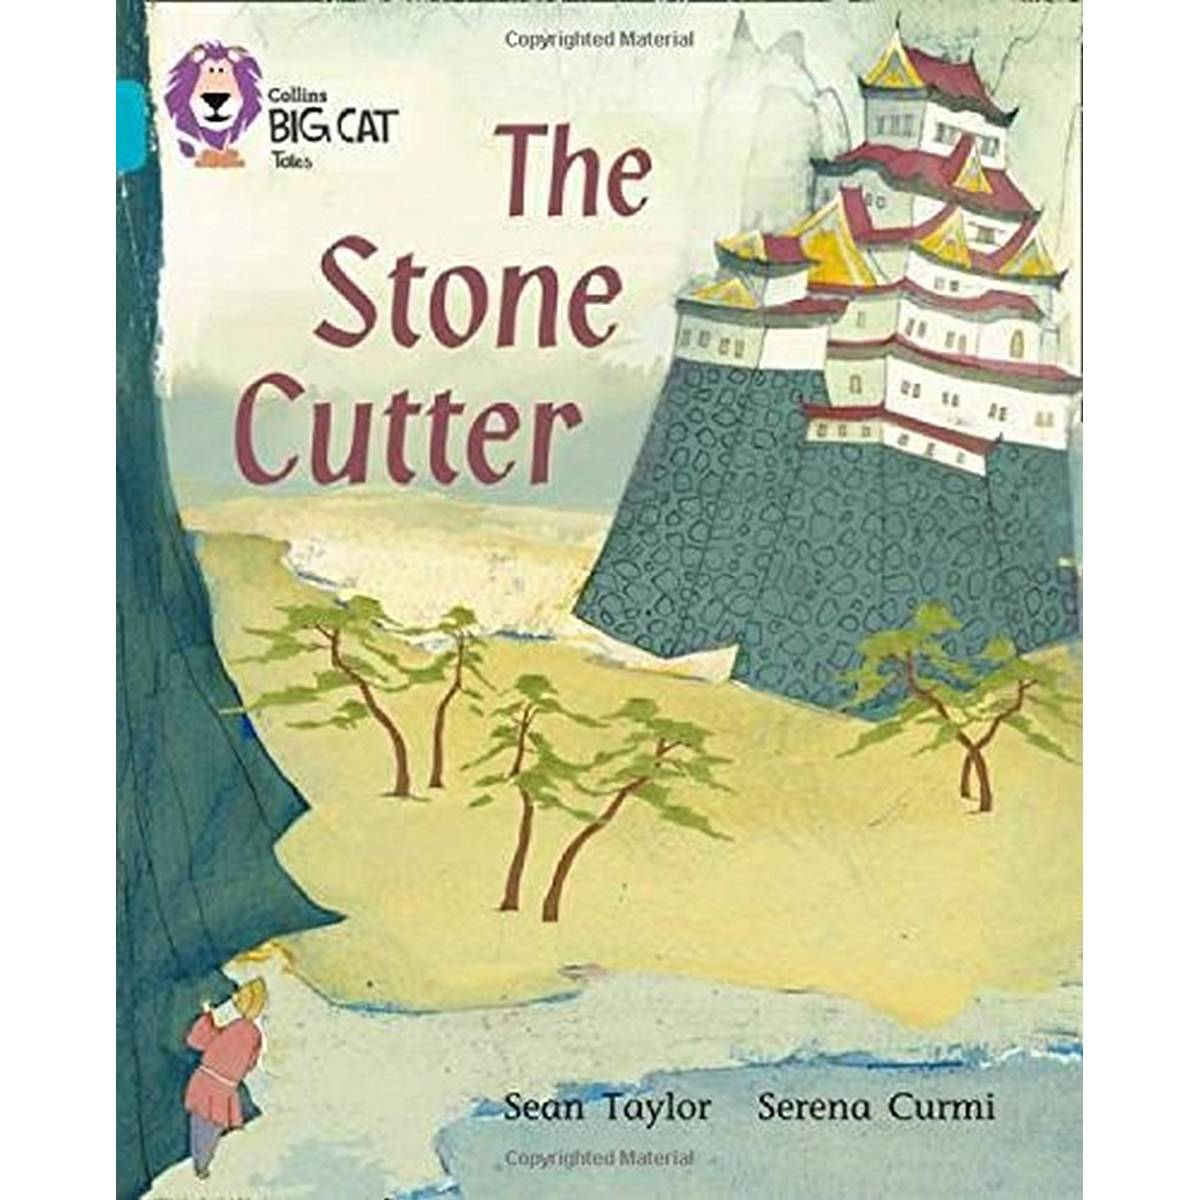 Big Cat Turquoise The Stone Cutter